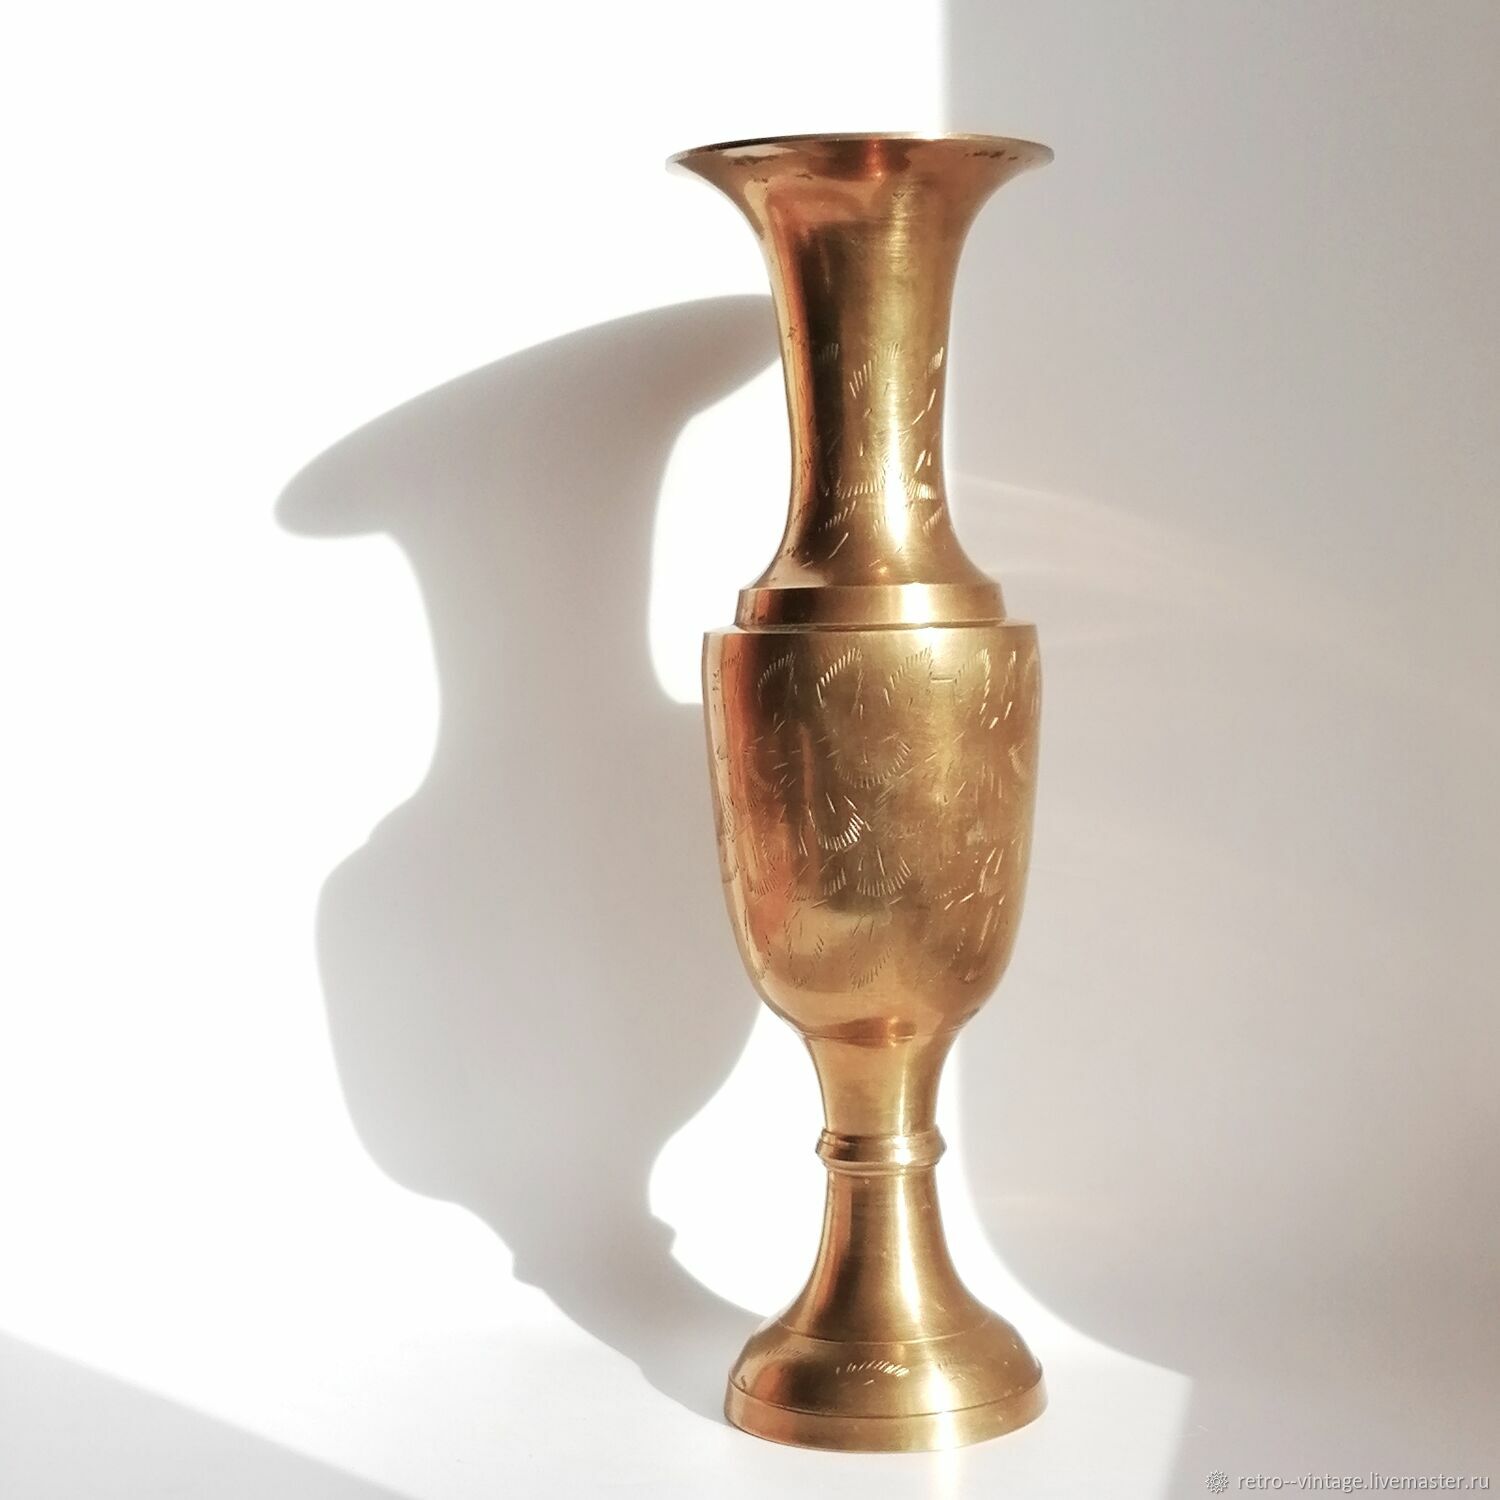 Etched brass vase from india